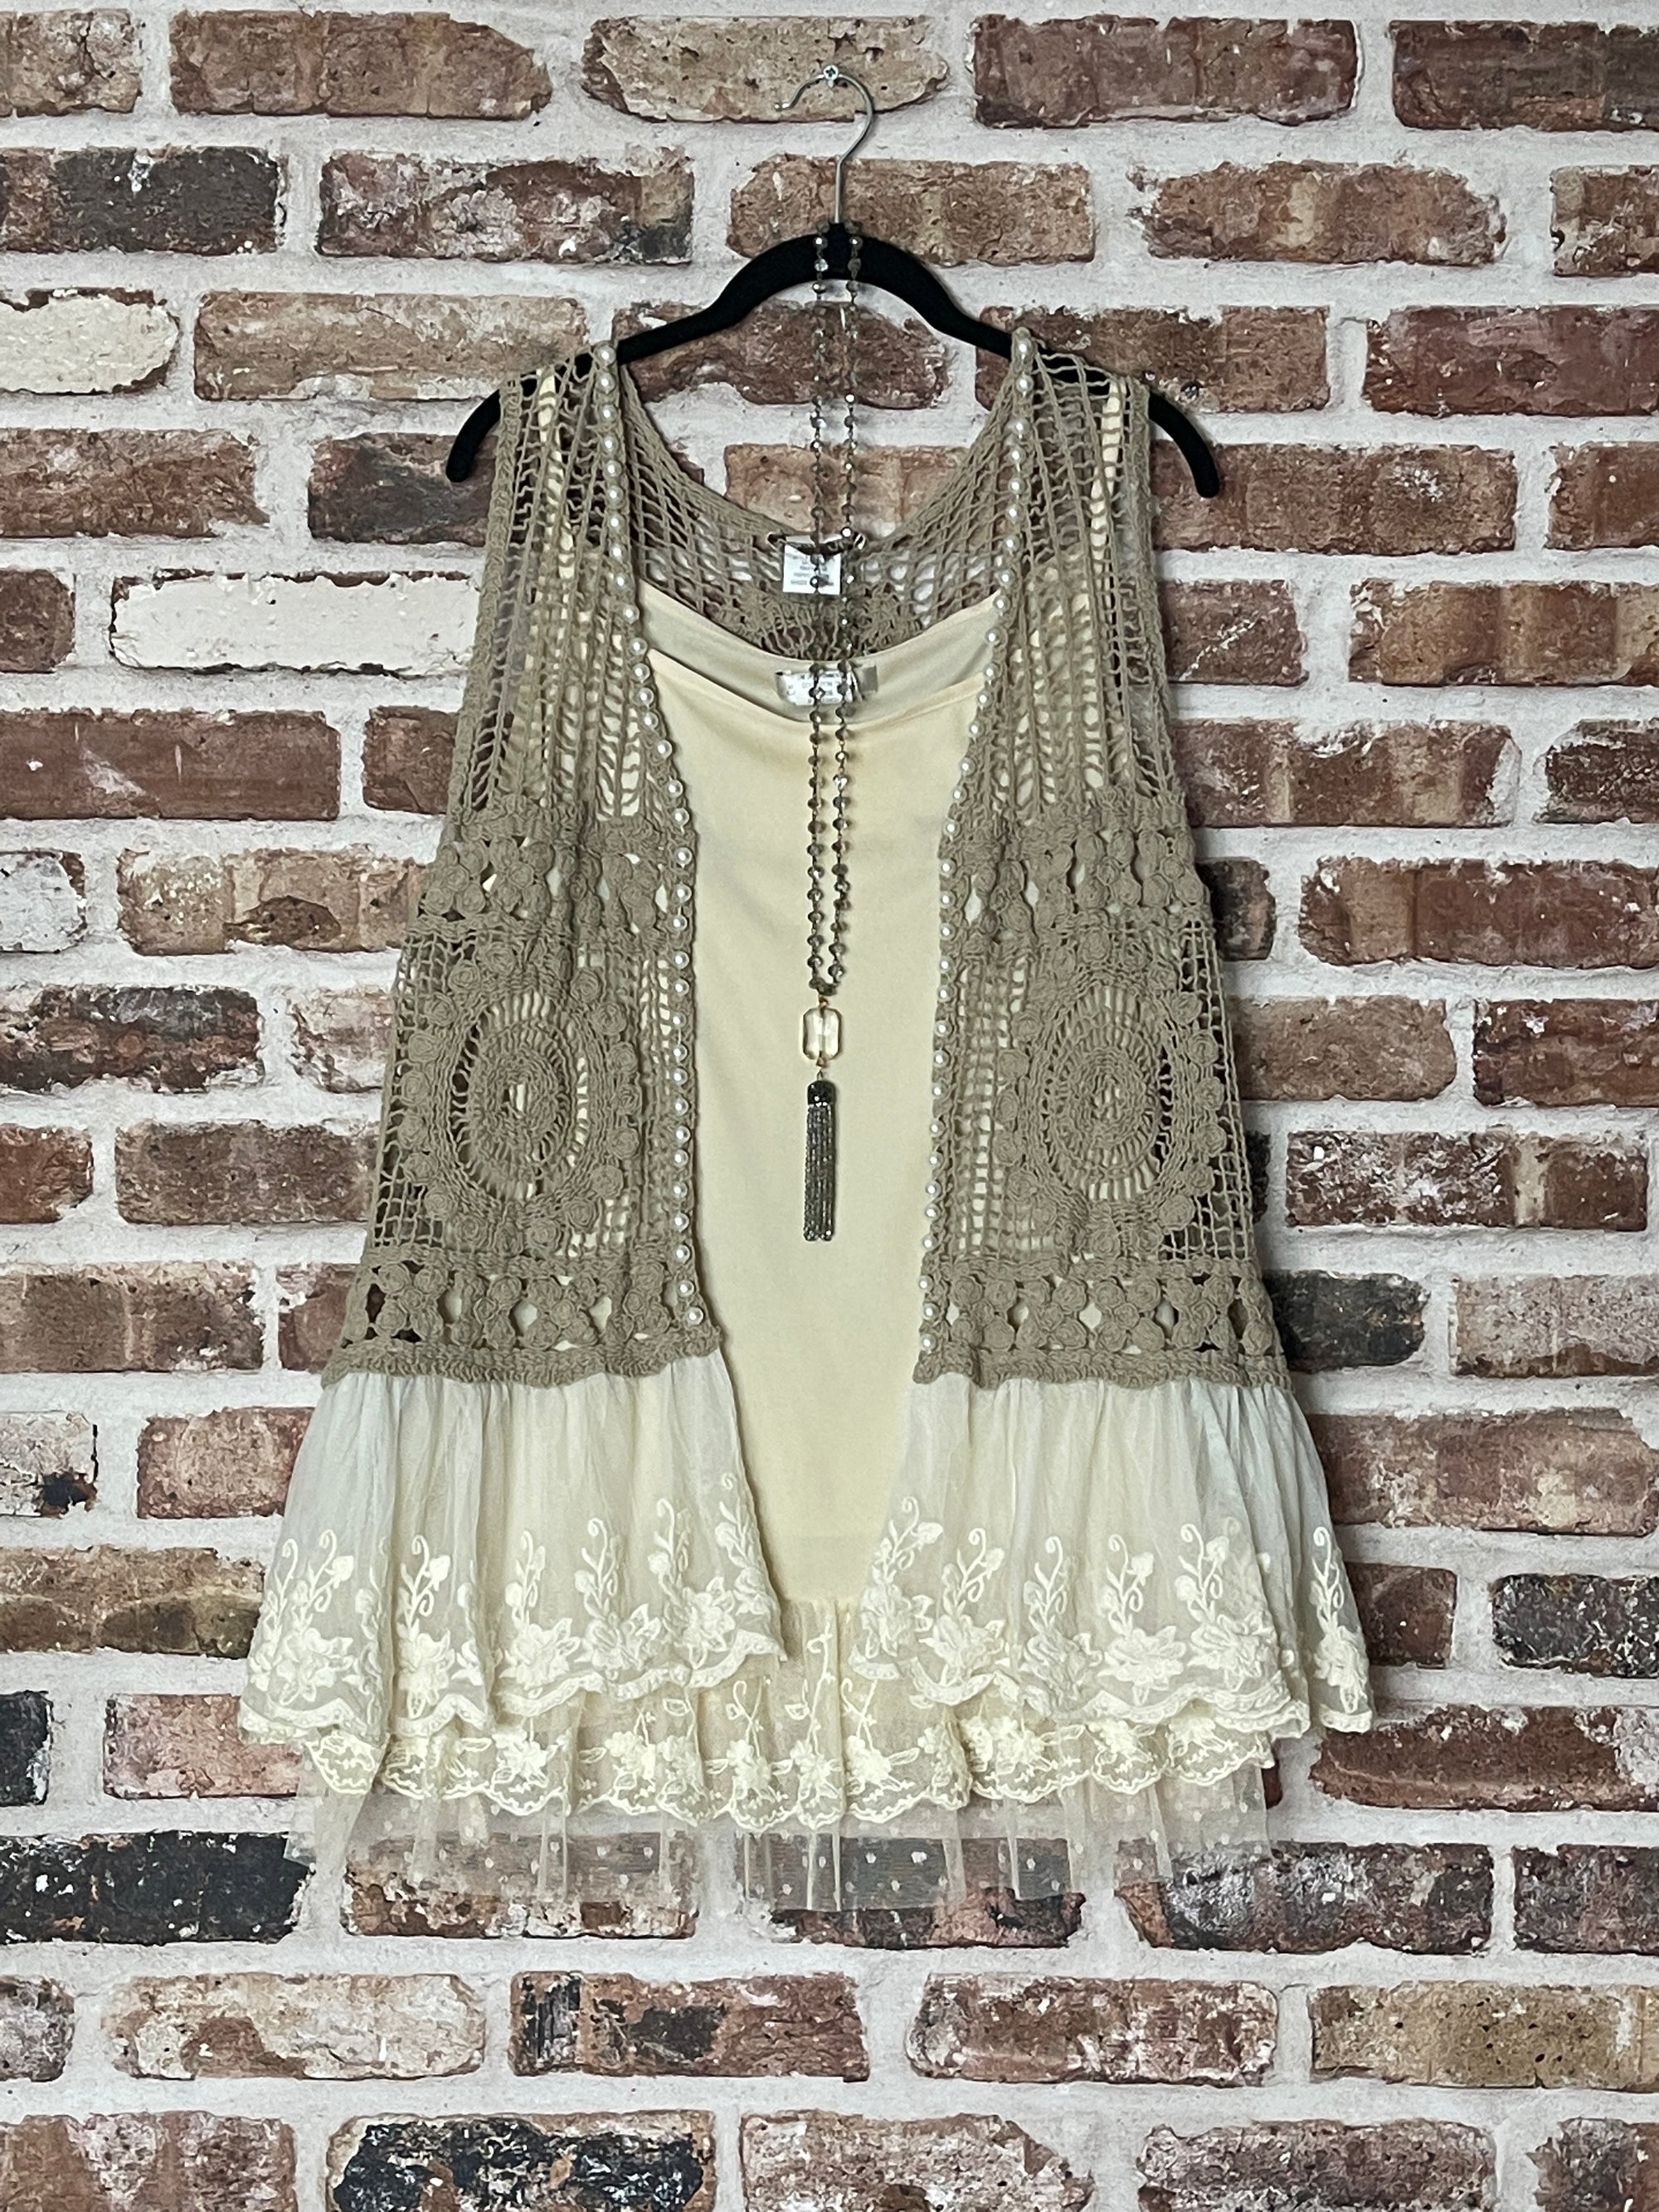 Be Yourself Embellished Laced Embroidered Boho Peasant Crochet Vest